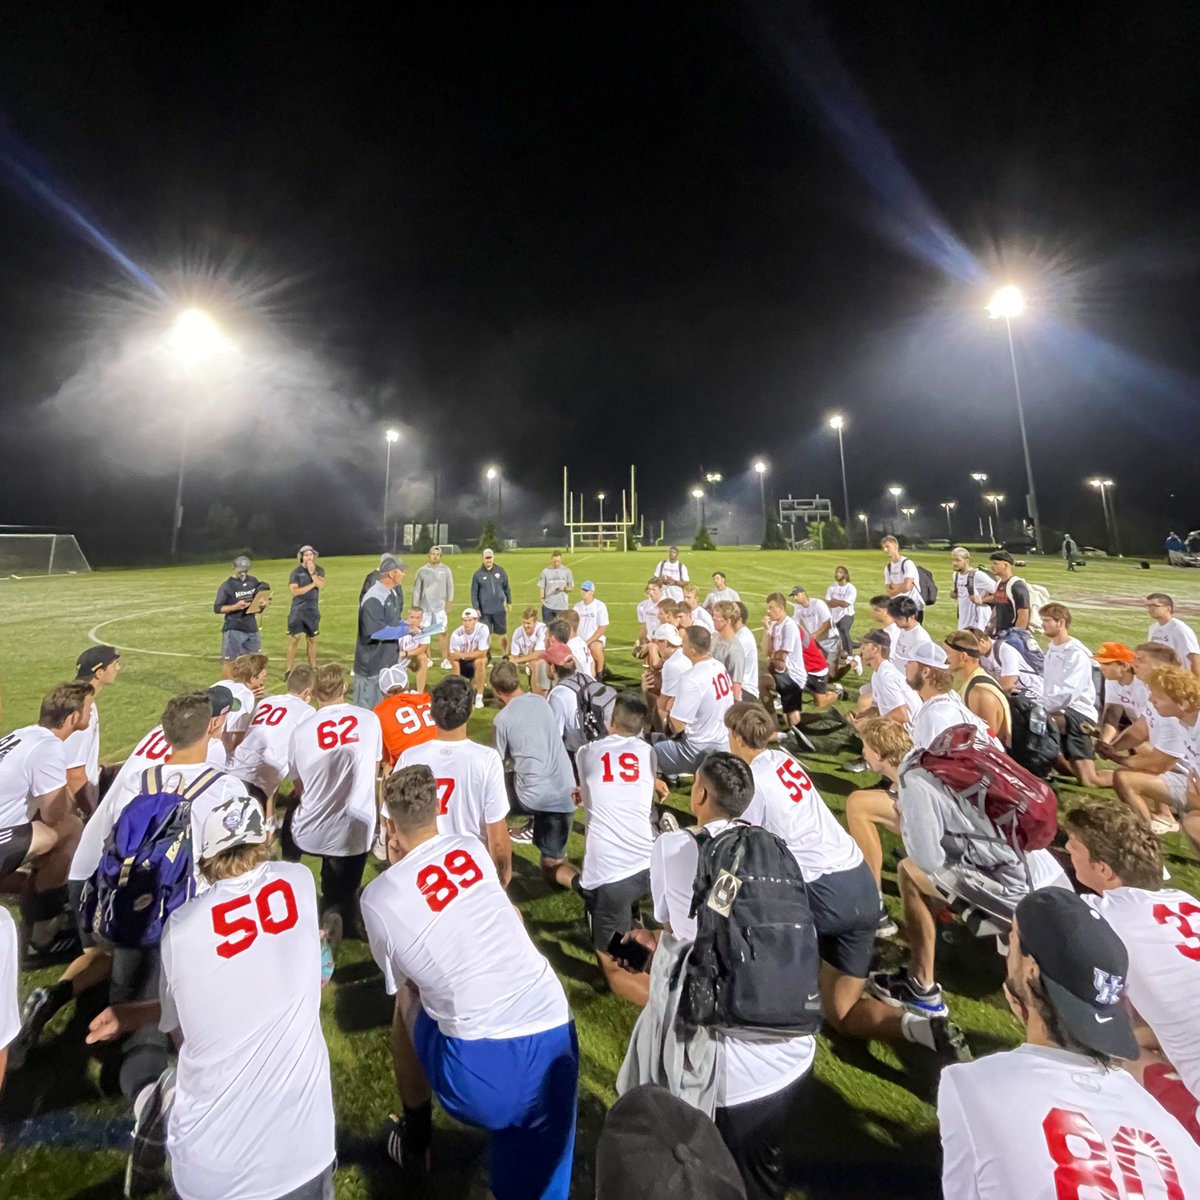 “In case you haven’t noticed, some of the best in college football are right here on this field.” - Coach Kohl BIG performances last night to end Day 1 of the College #KohlsElite Camp.